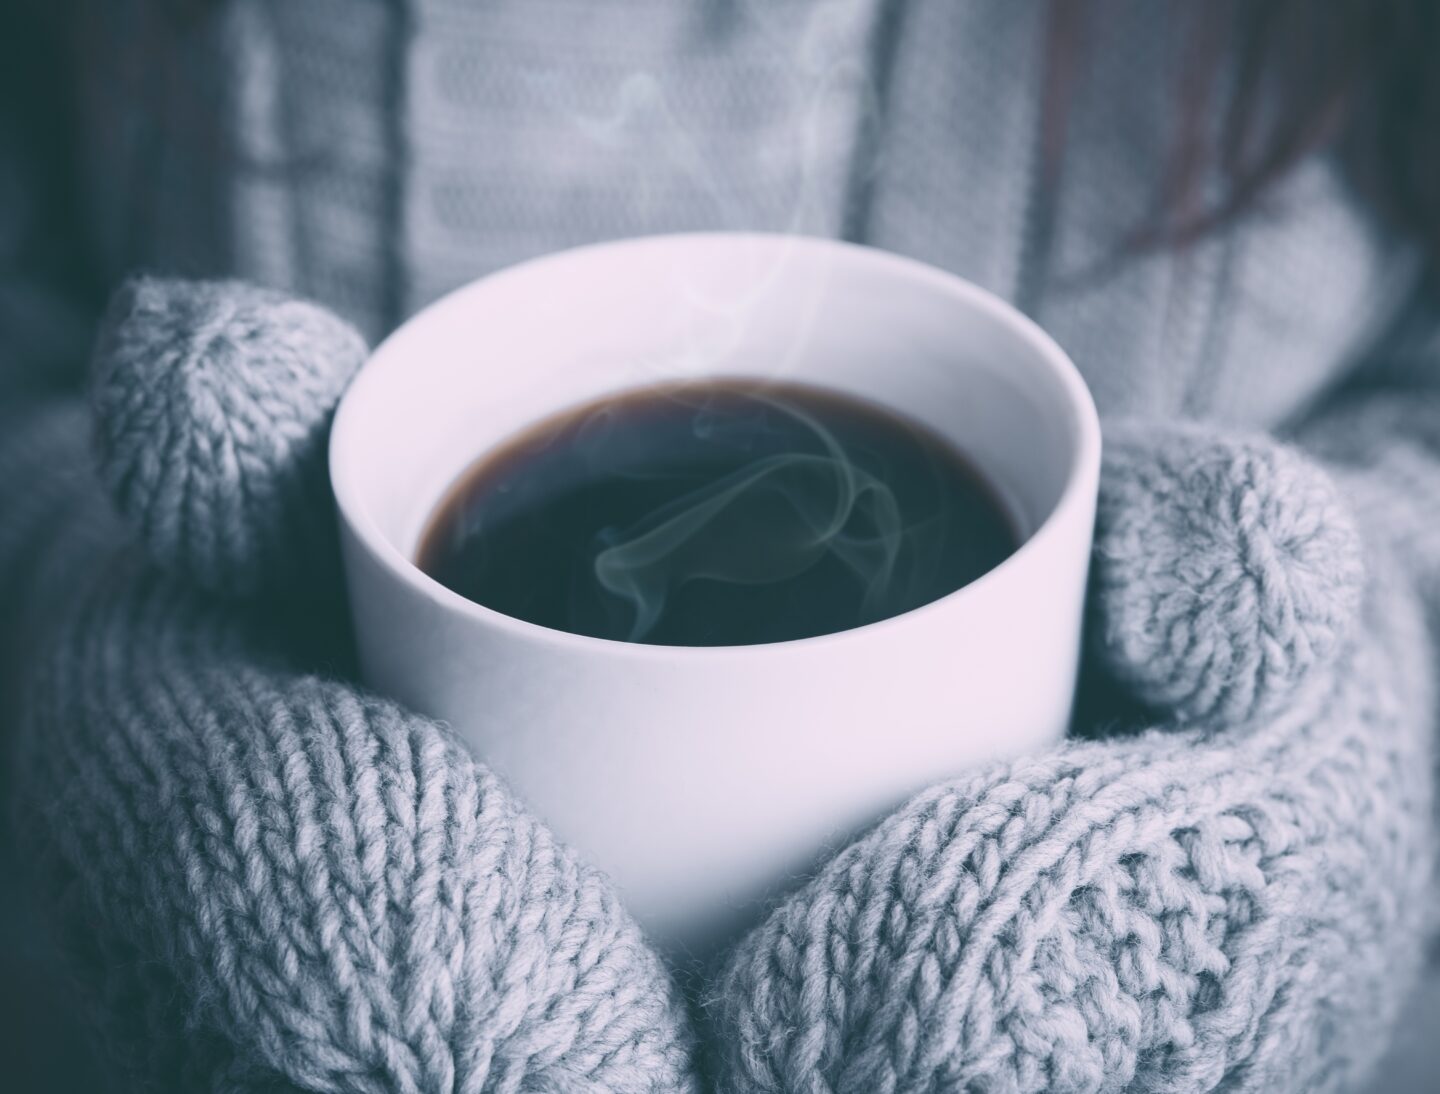 Survival Guide: Getting Through the Long, Cold Winter In Cozy Comfort